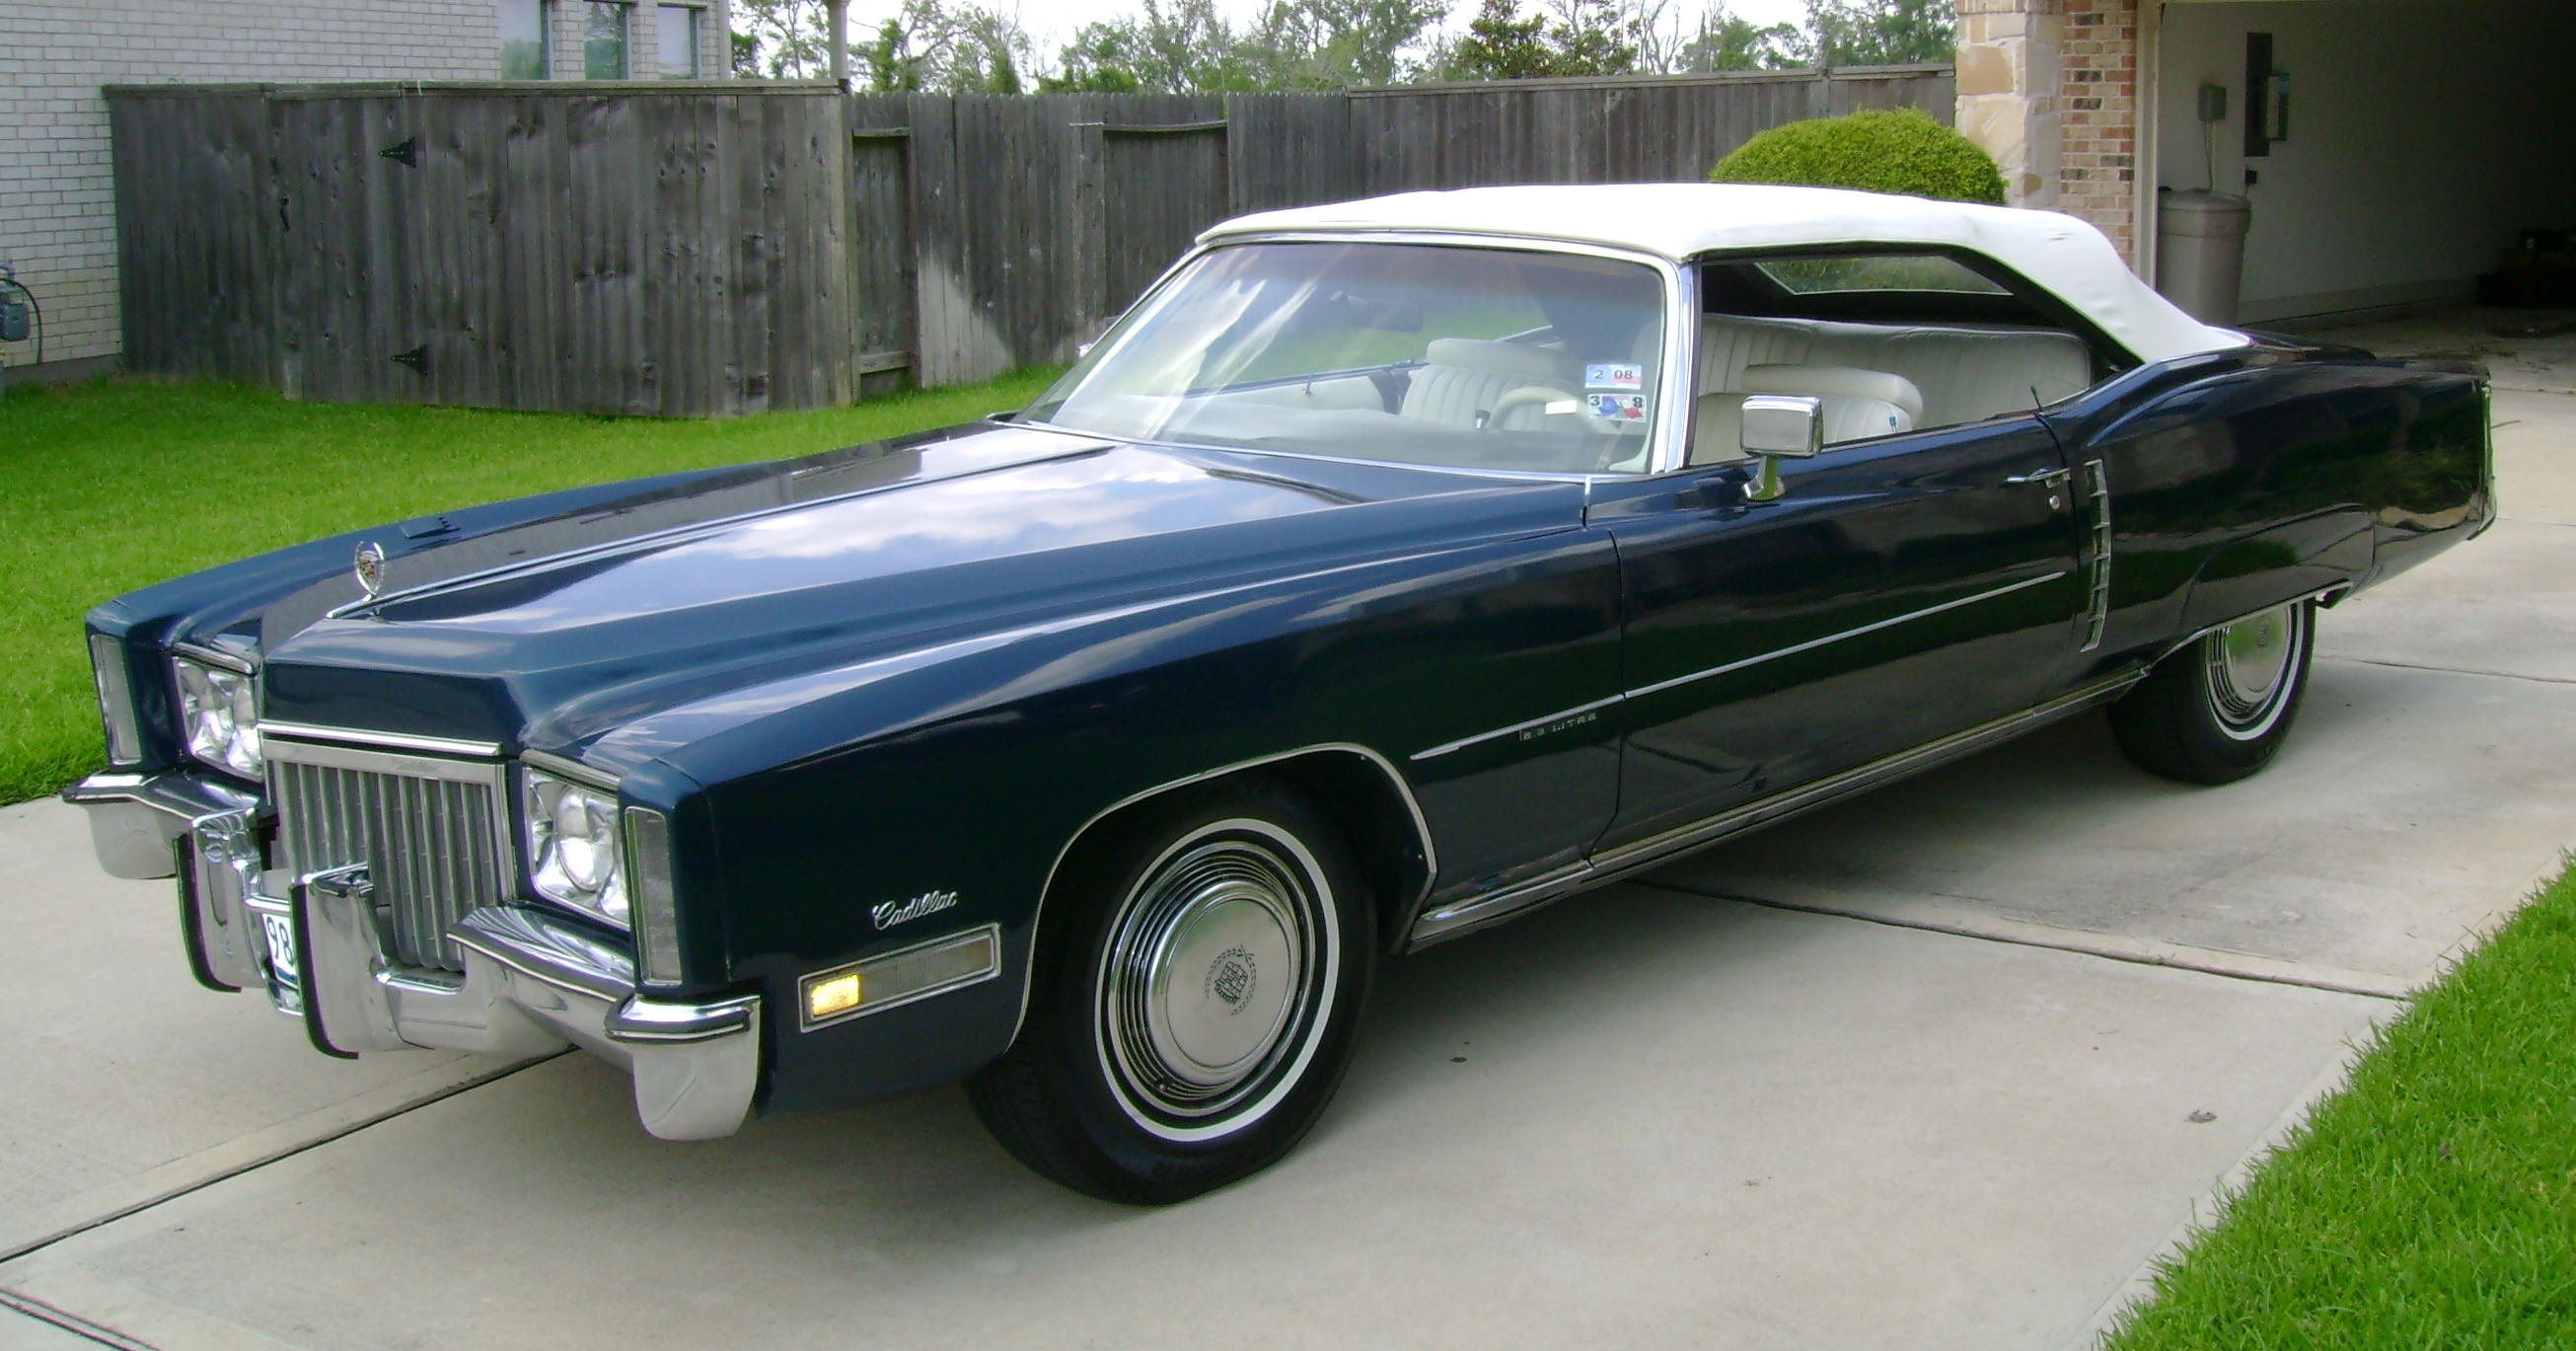 1972 Cadillac Eldorado Convertible. It belonged to my stepfather for about 15 years as a project car. My daughter's father purchased it about a year ago.